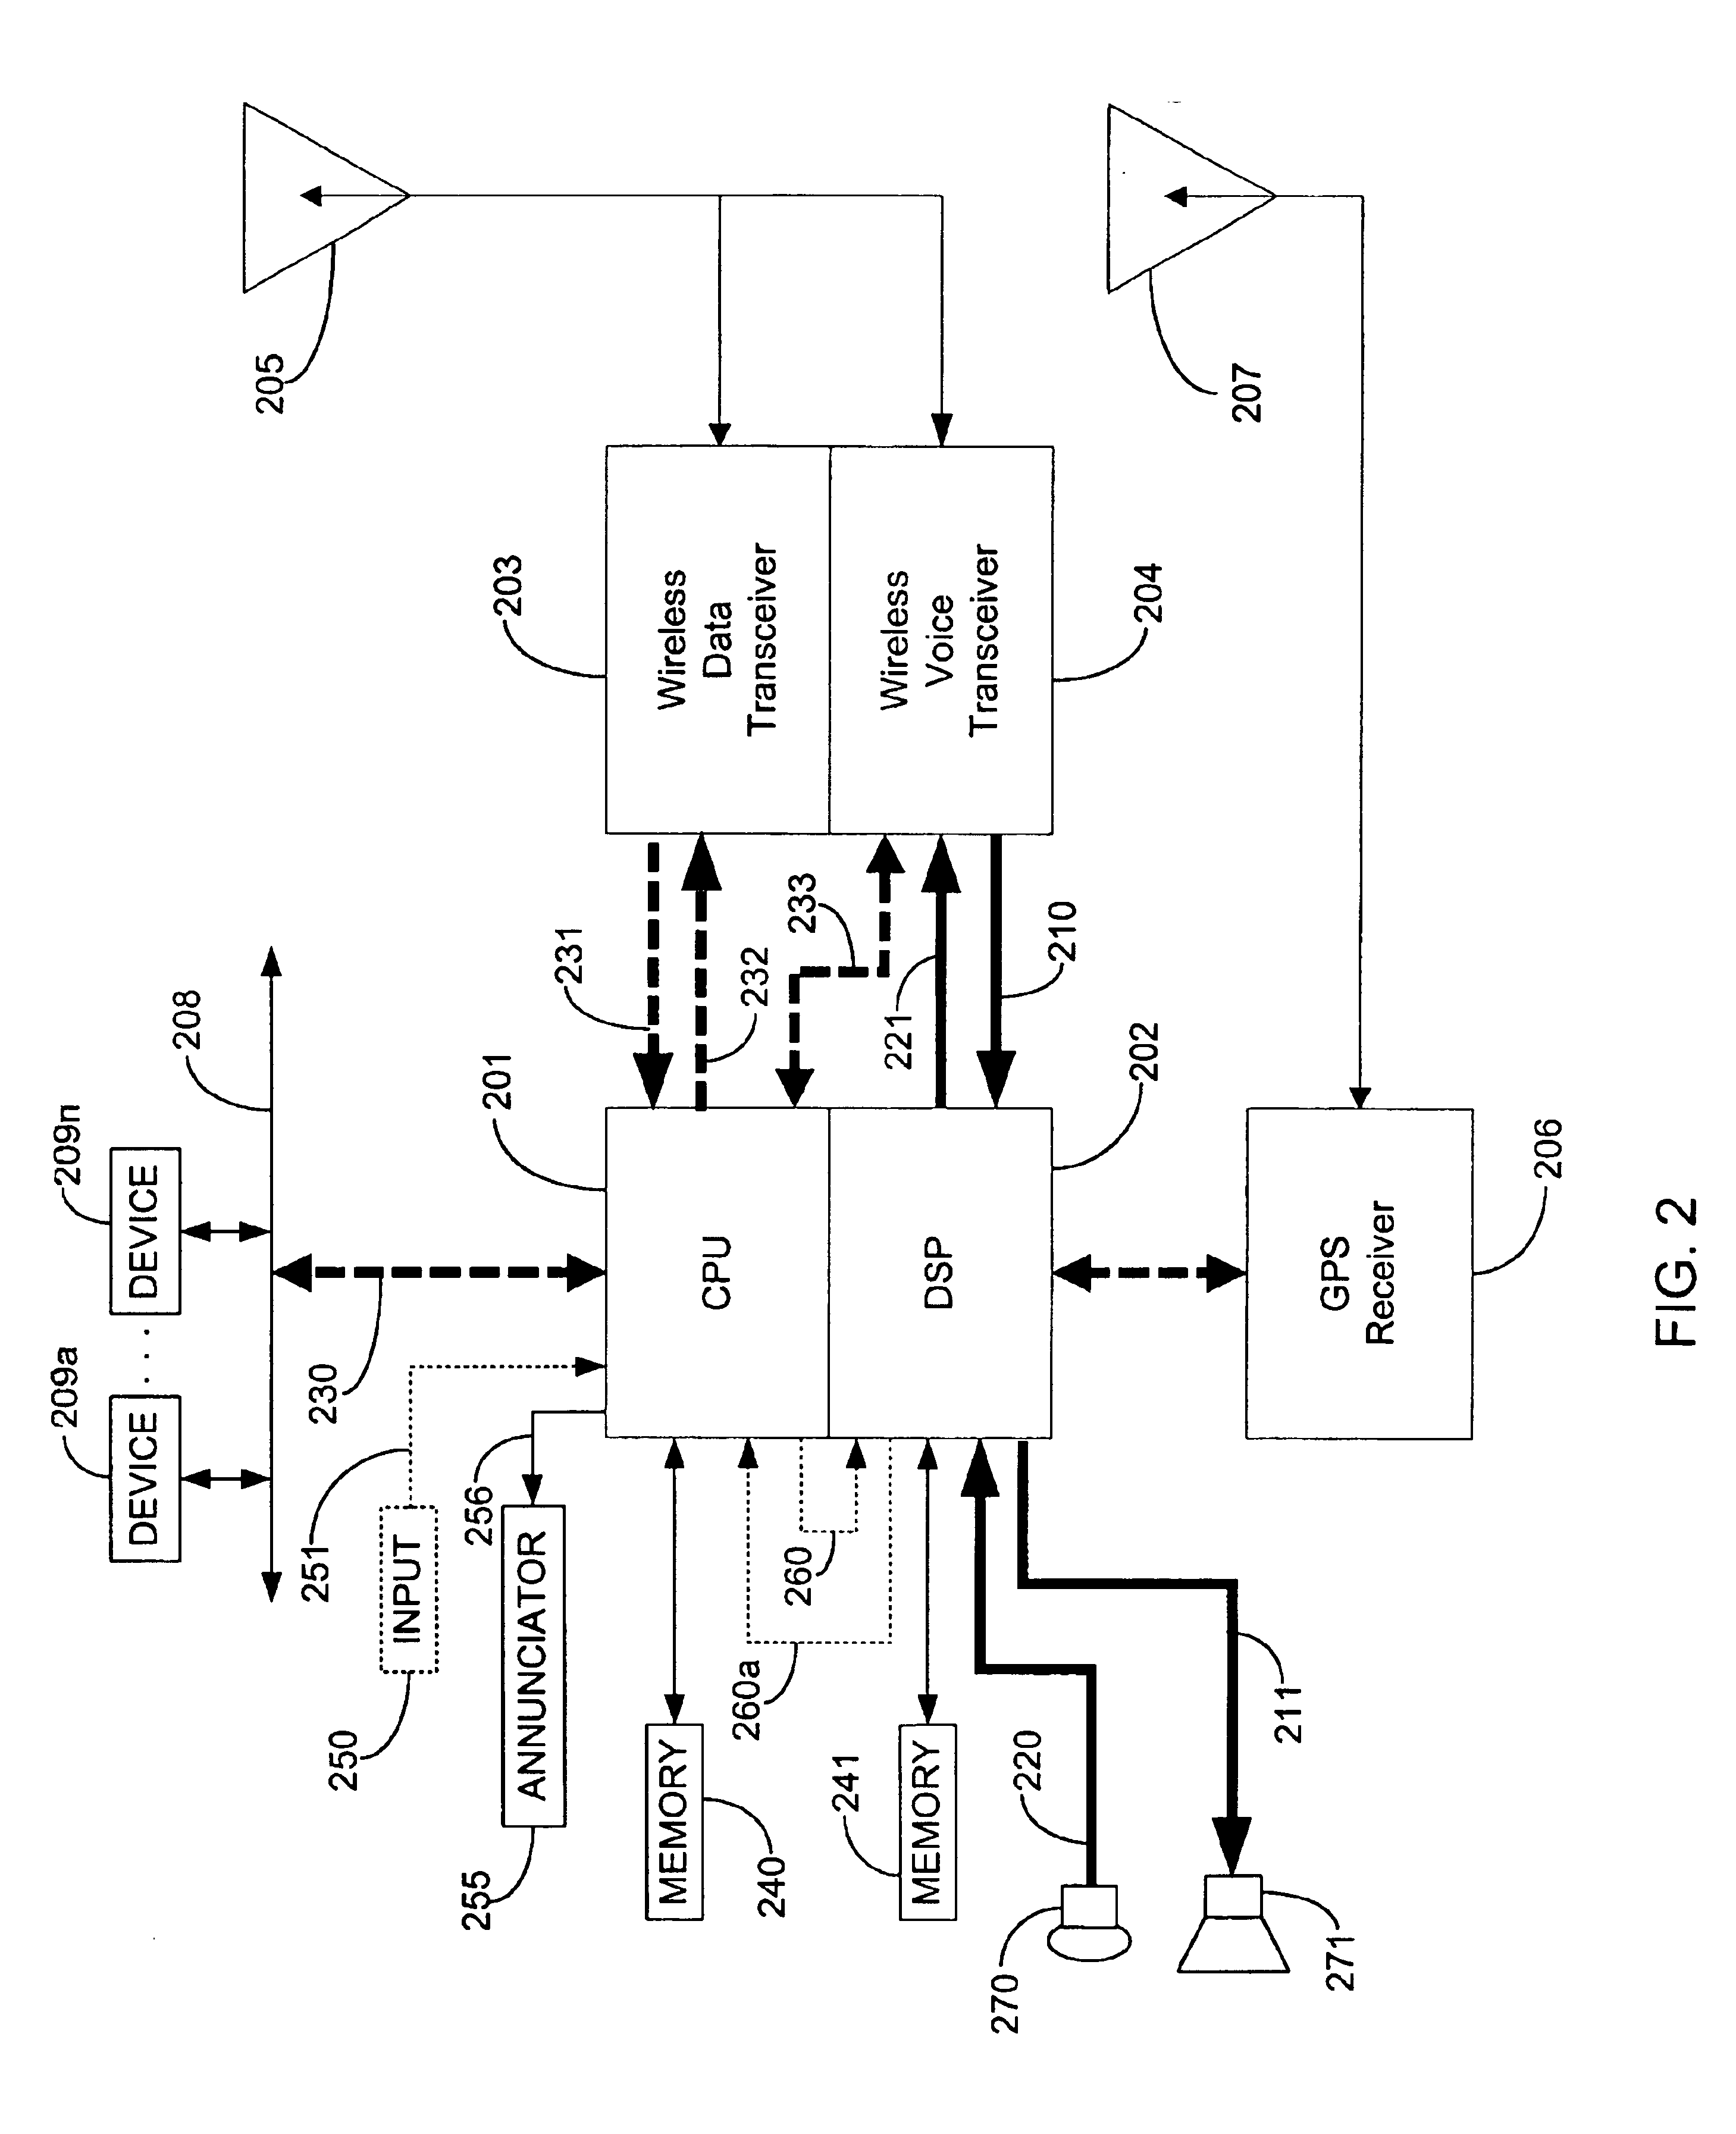 Method and apparatus for processing an input speech signal during presentation of an output audio signal